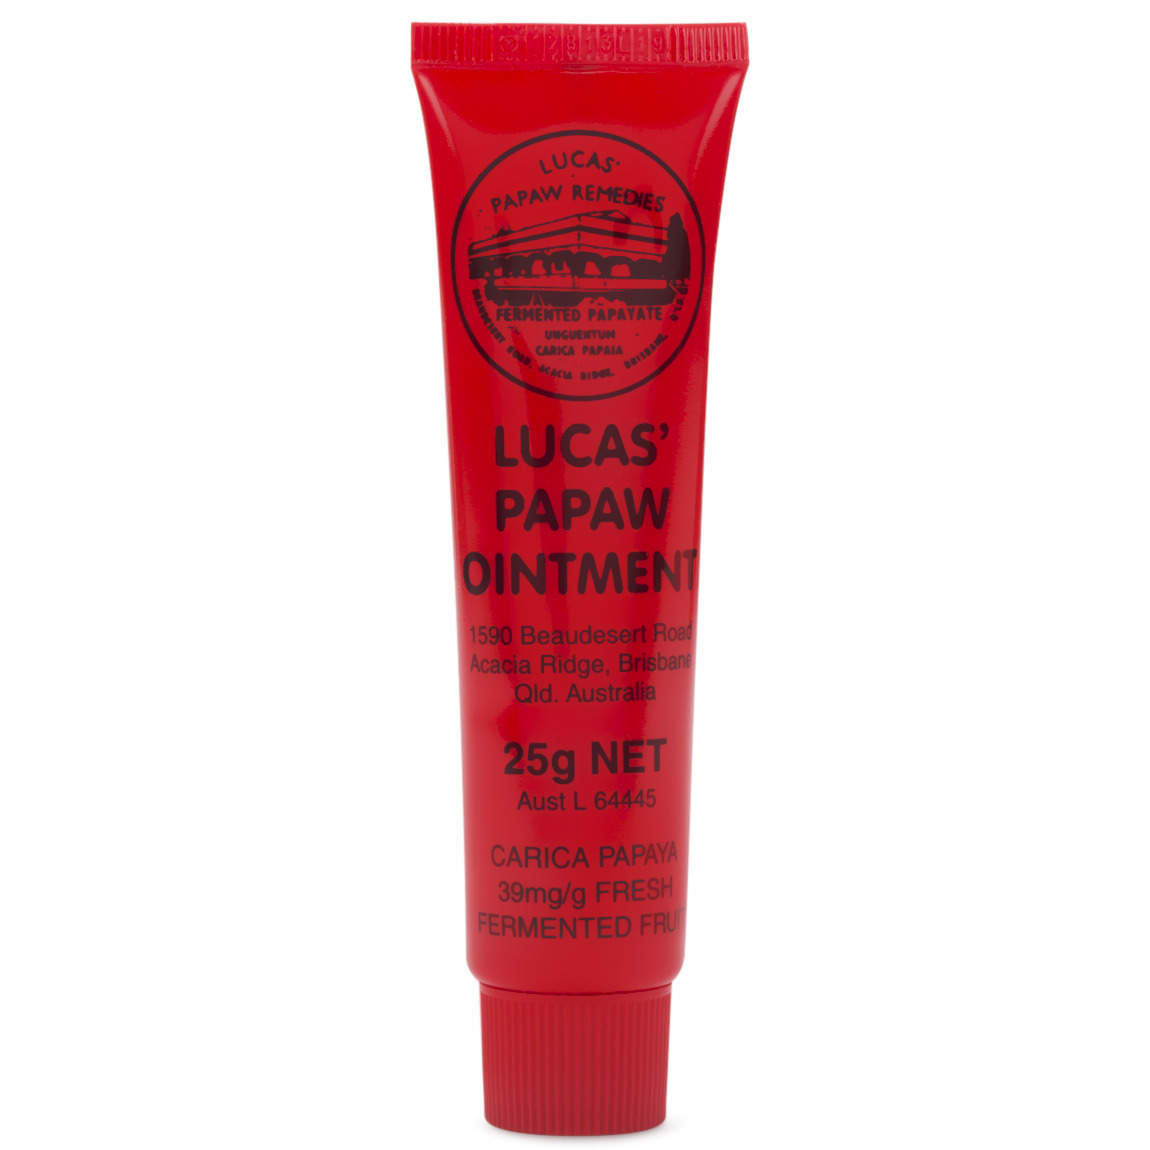 Lucas' Papaw Remedies Lucas’ Papaw Ointment 25g Tube alternative view 1 - product swatch.